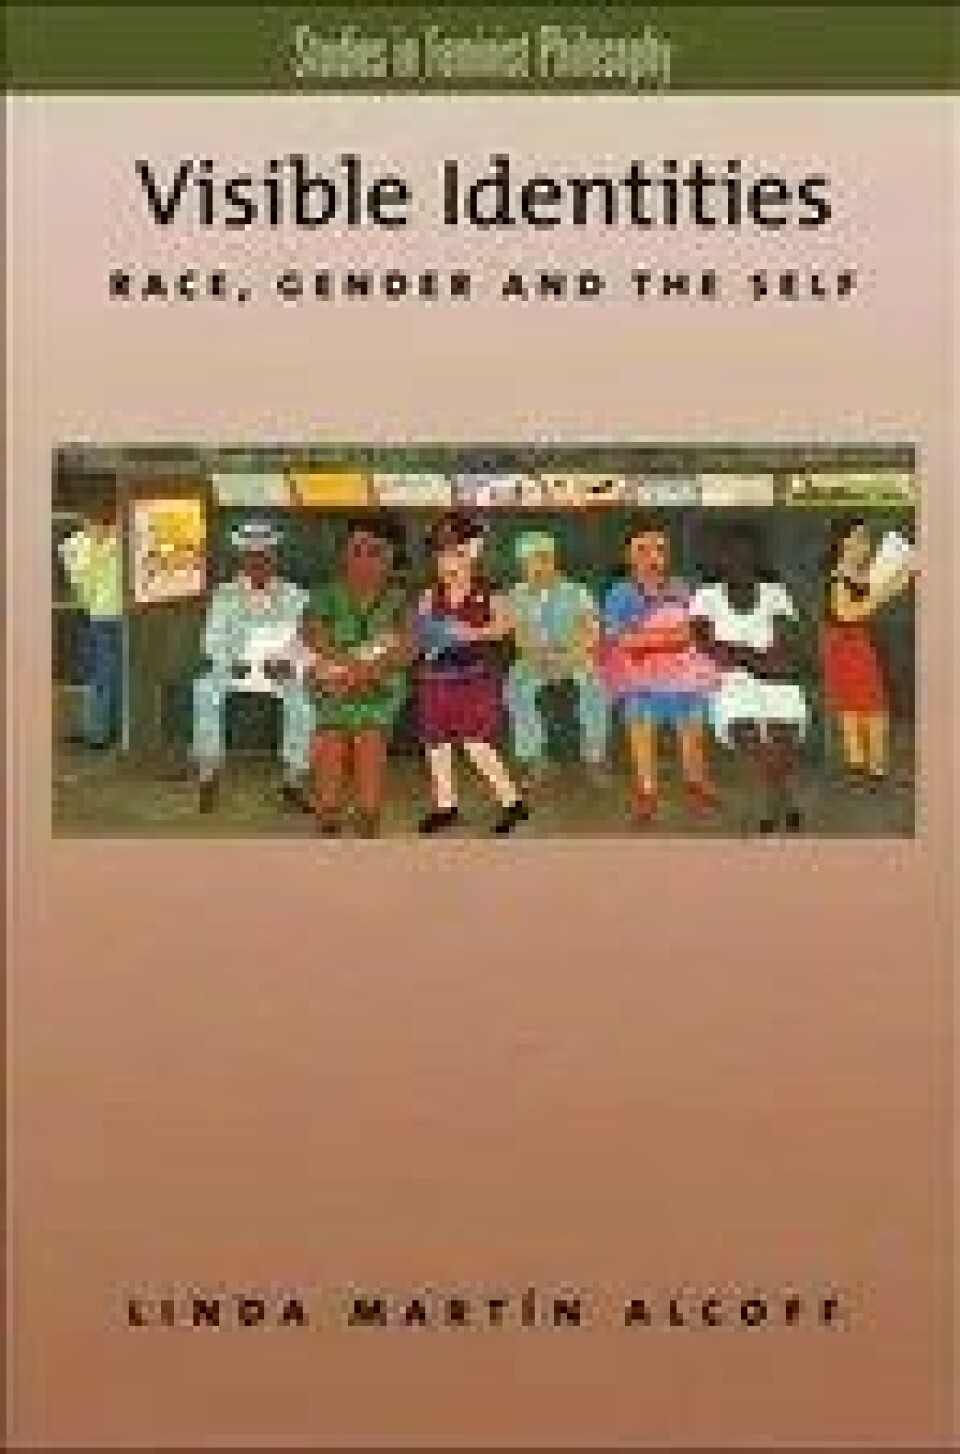 Bok: Visible Identities. Race, Gender, and the Self – Linda Alcoff